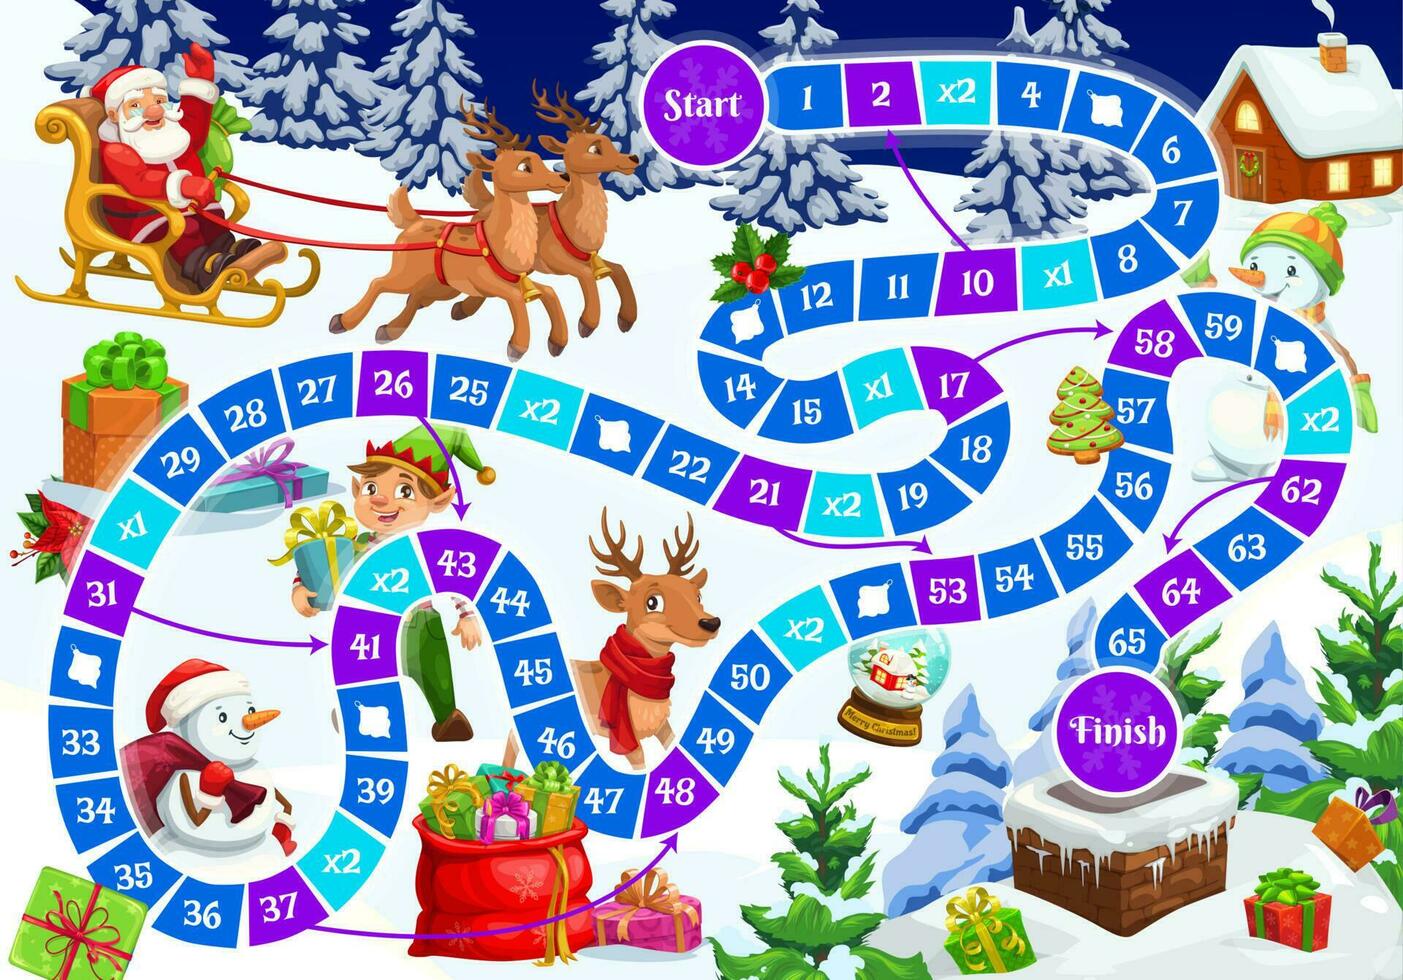 Kids holiday board game with Christmas characters vector